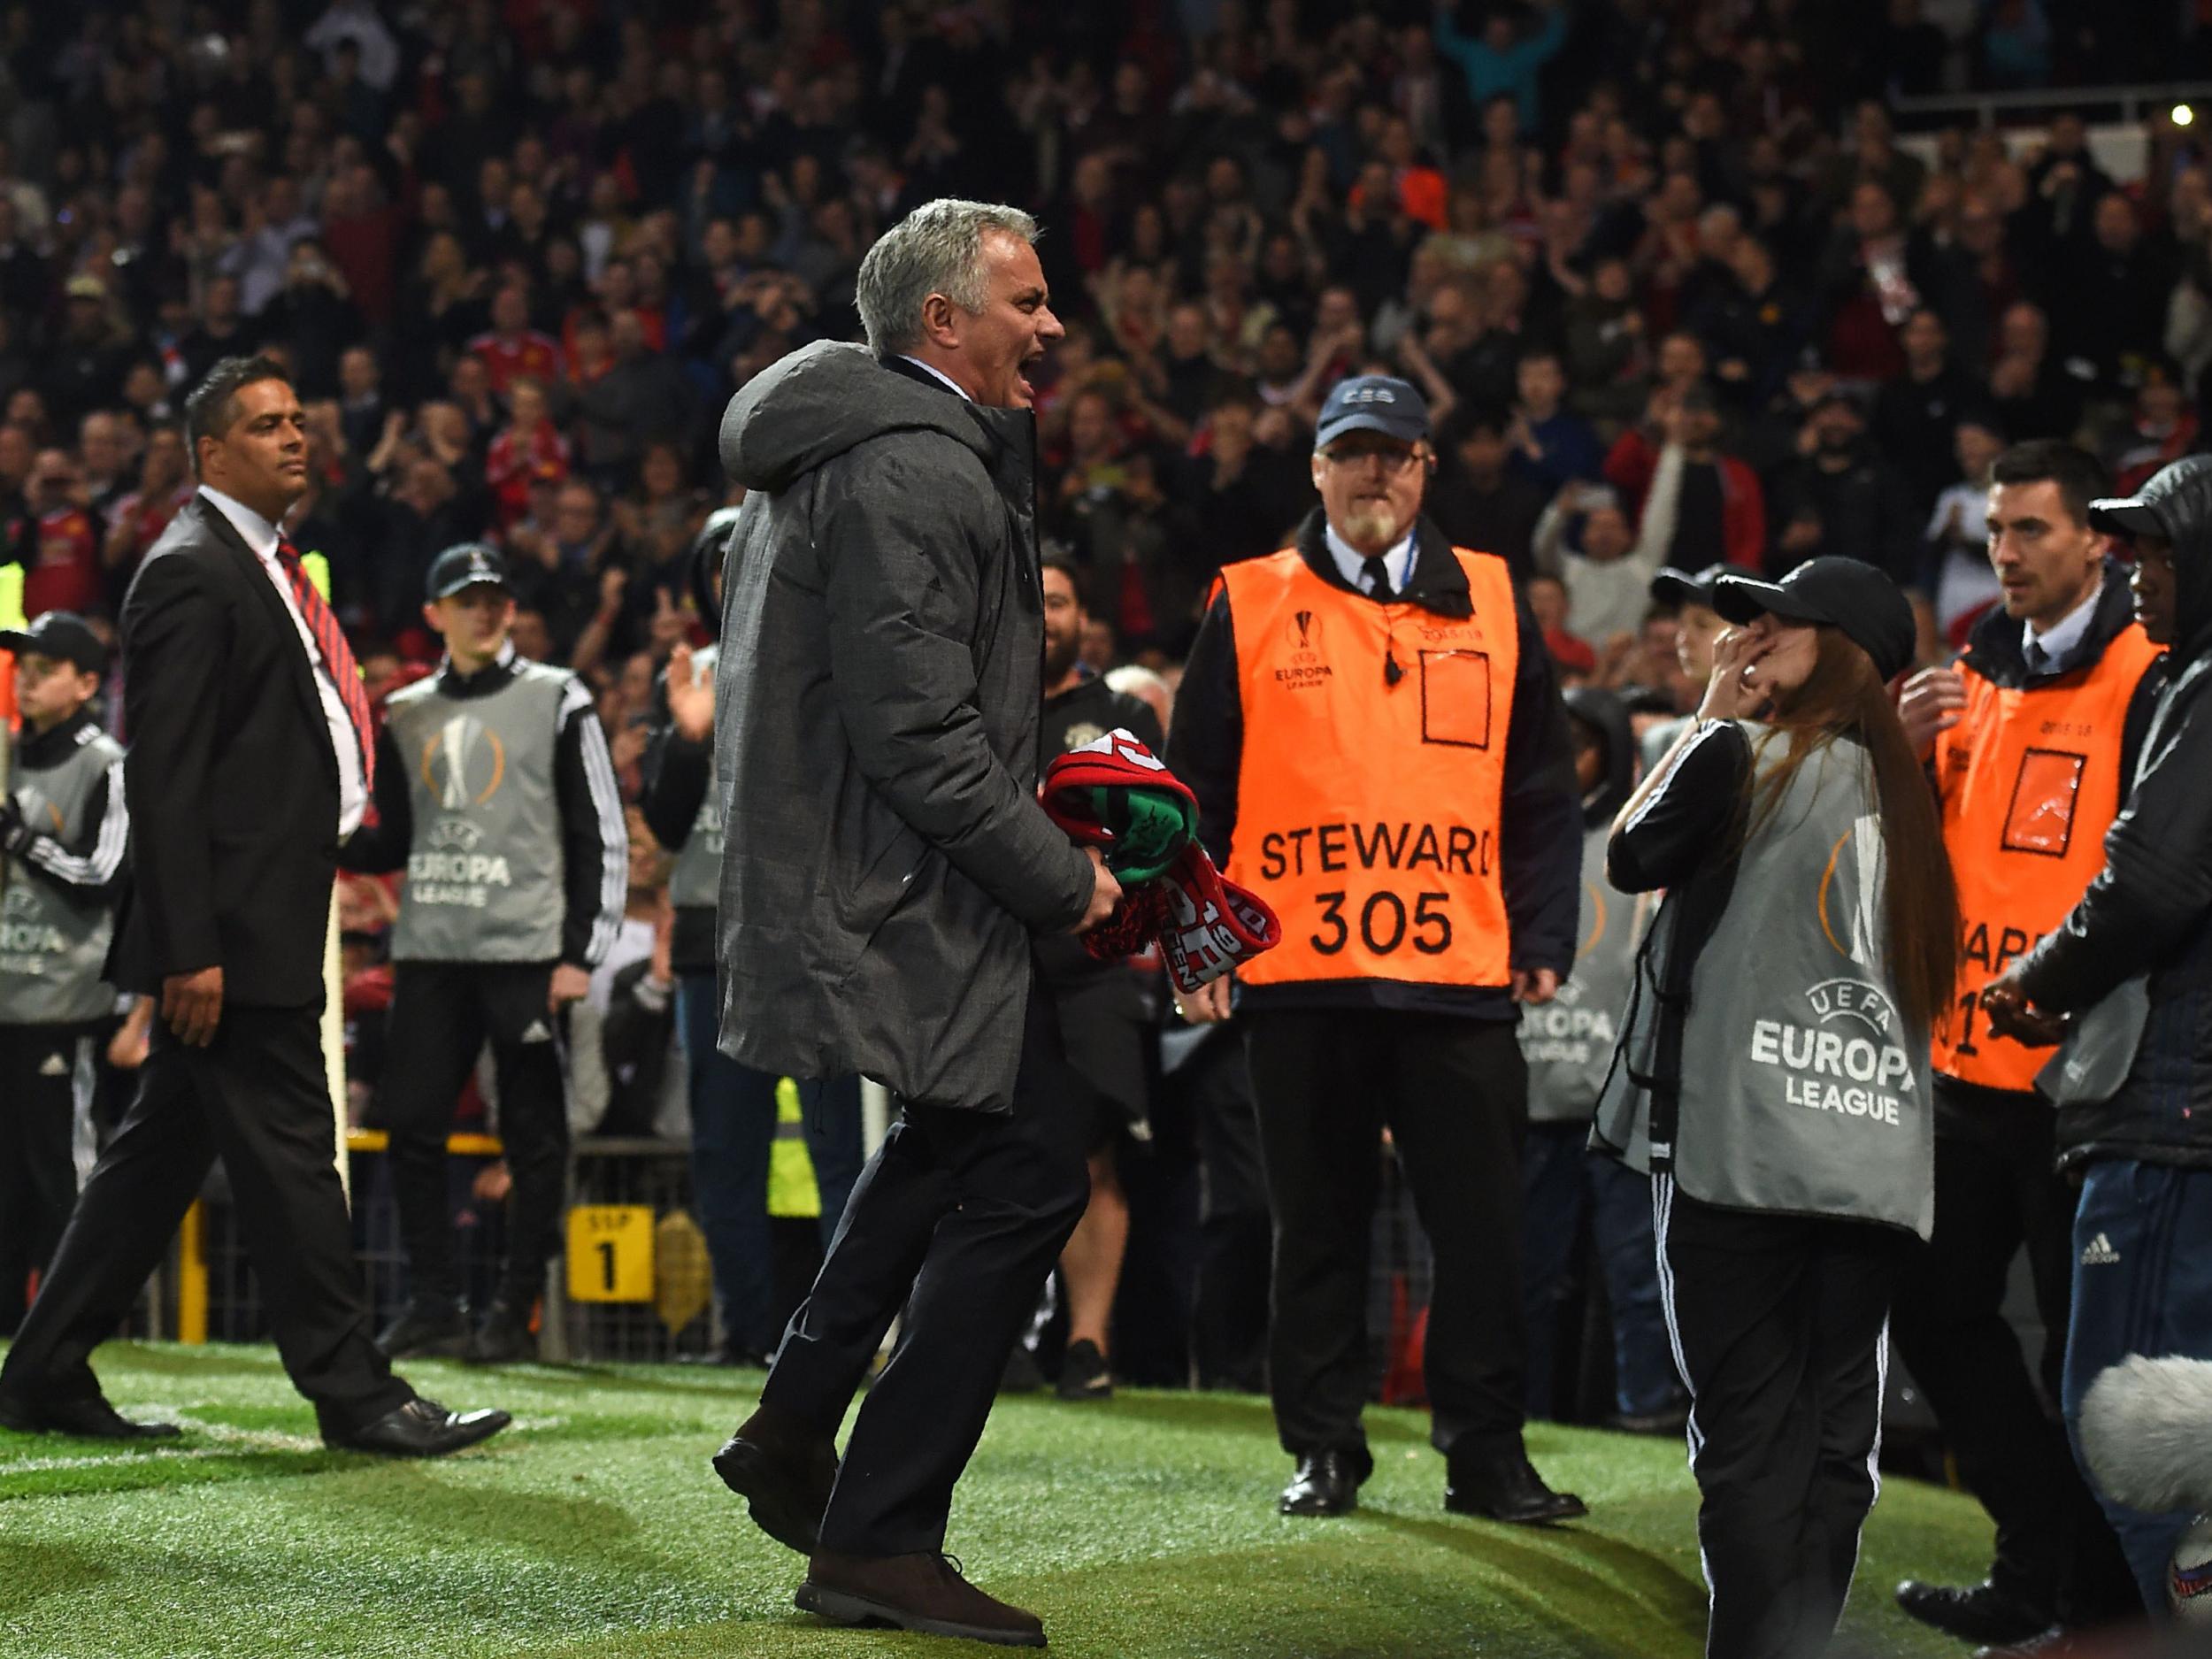 Mourinho looked as relieved as anyone has ever seen him after the final whistle